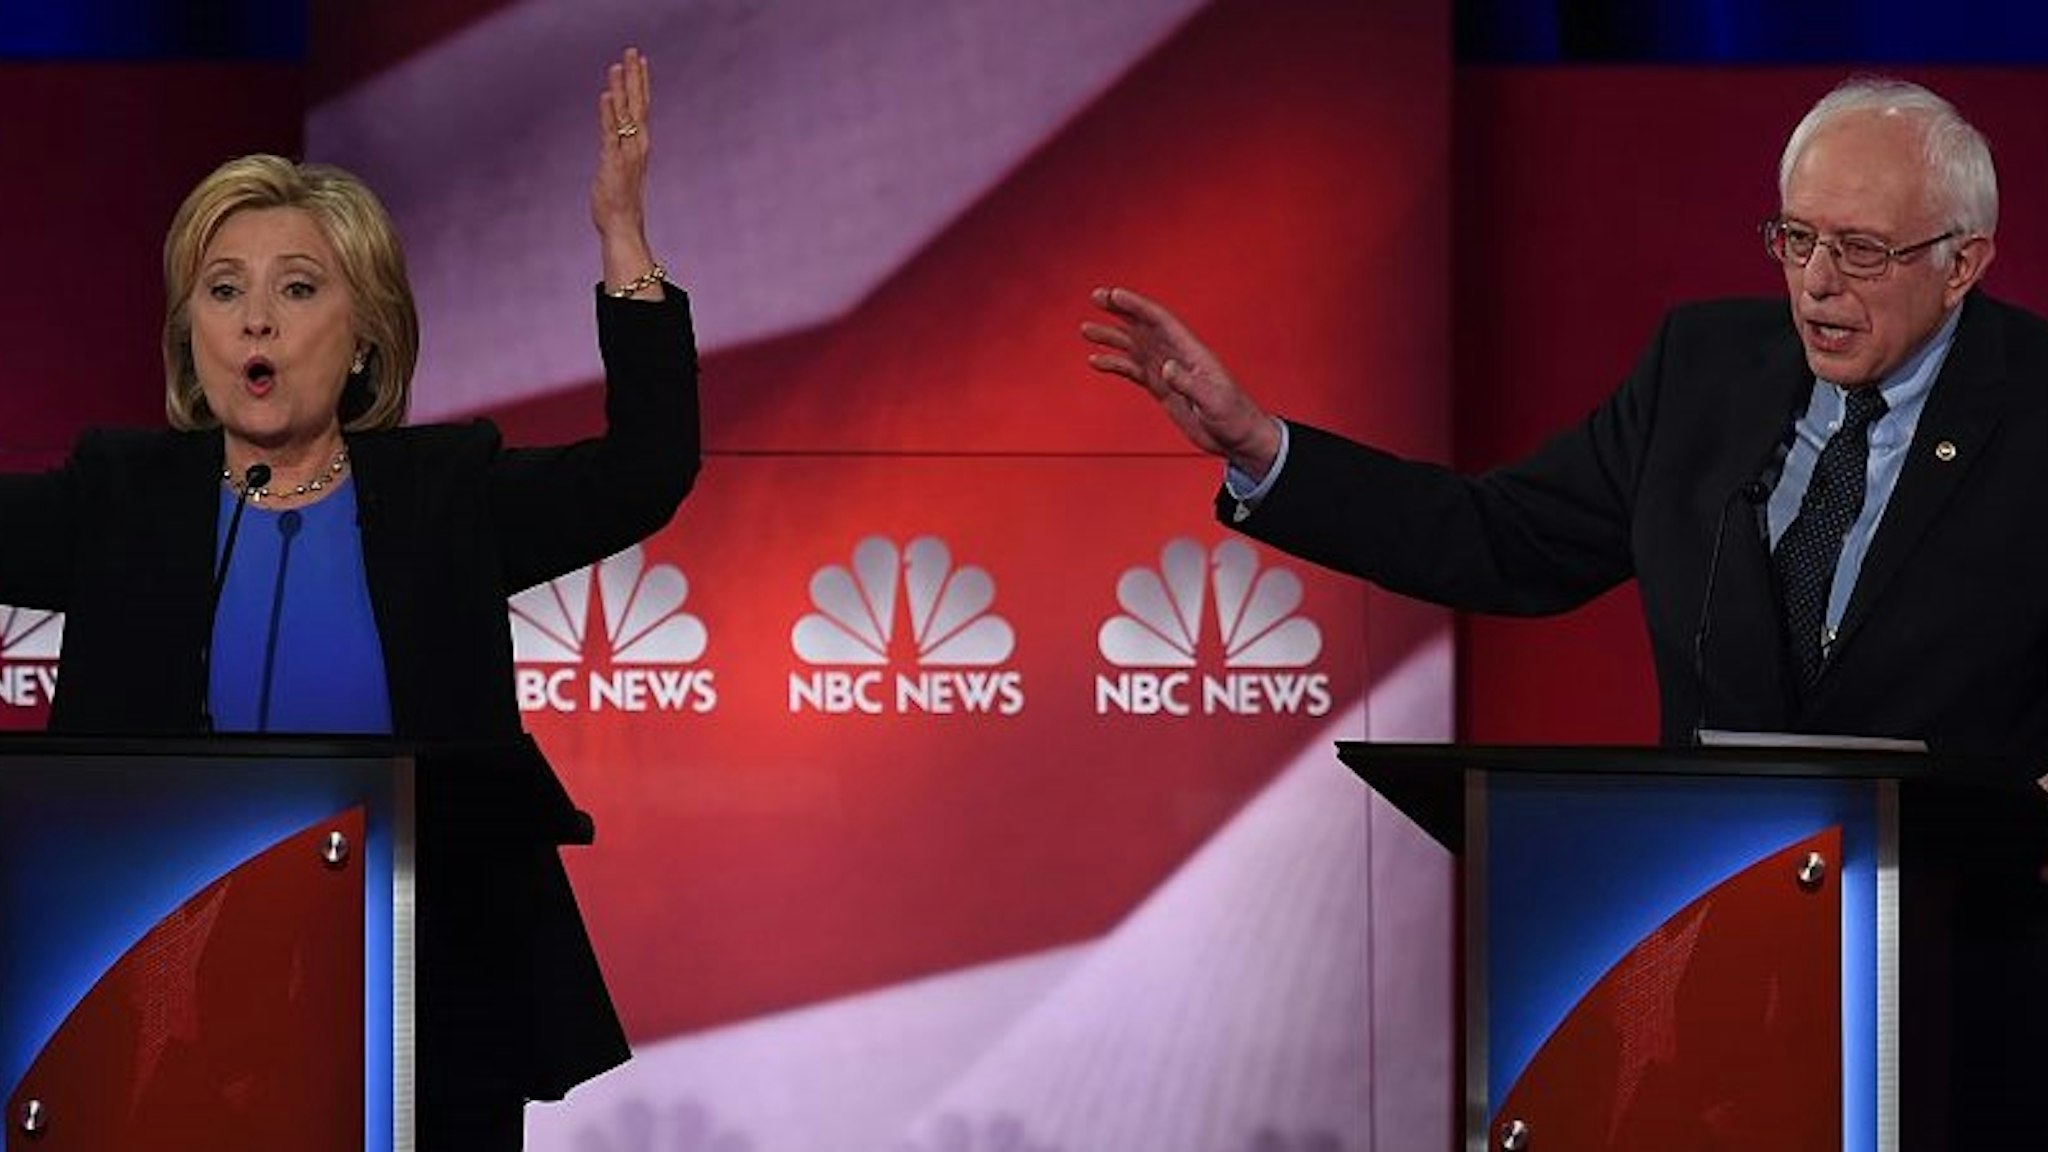 TOPSHOT - Democratic presidential candidates Hillary Clinton (L) and Bernie Sanders (R) participate in the NBC News -YouTube Democratic Candidates Debate on January 17, 2016 at the Gaillard Center in Charleston, South Carolina.. / AFP / TIMOTHY A. CLARY (Photo credit should read